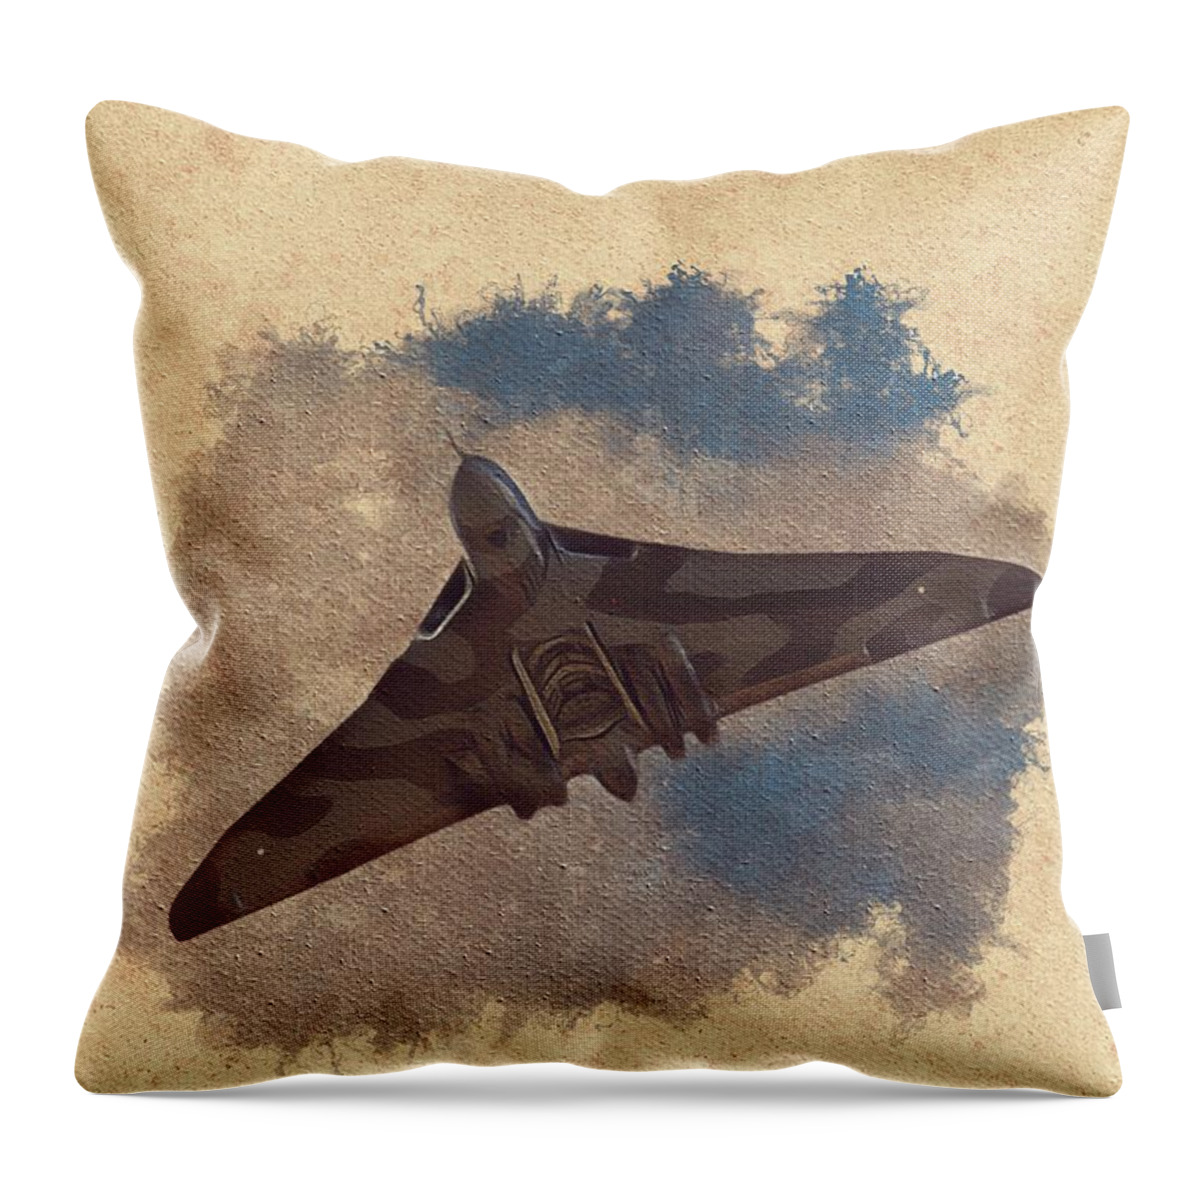 Vulcan Throw Pillow featuring the painting Vulcan Bomber by Esoterica Art Agency